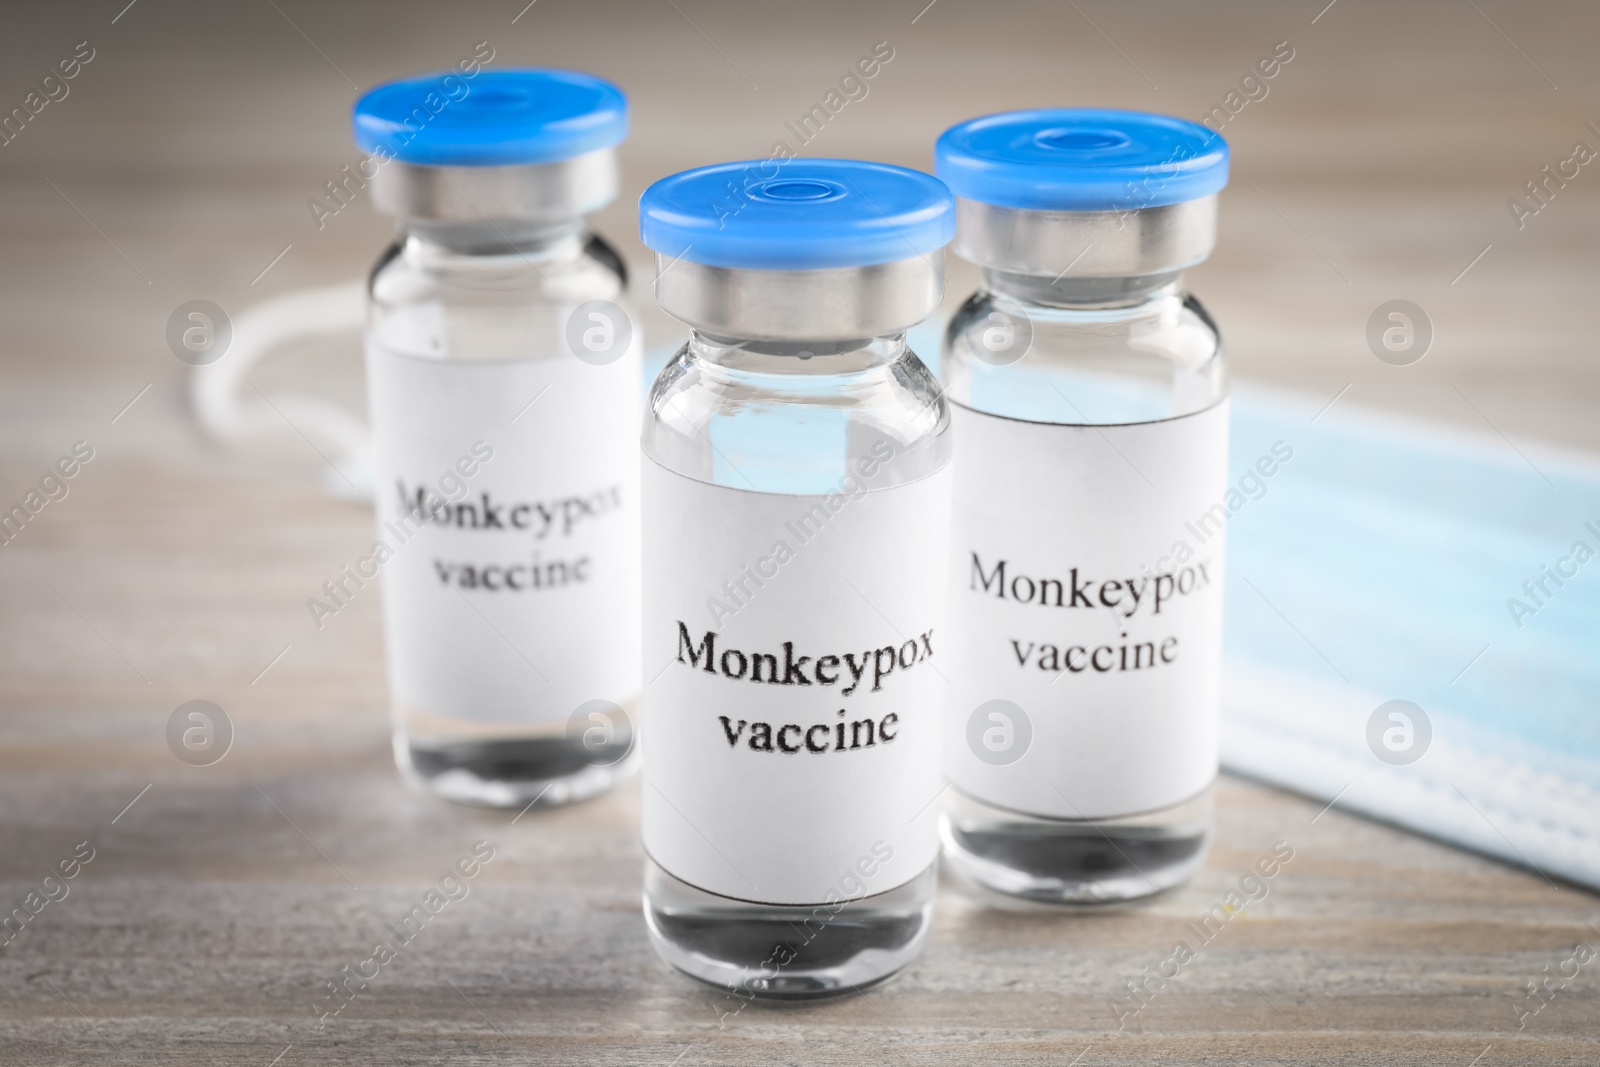 Photo of Monkeypox vaccine in glass vials and medical mask on wooden table